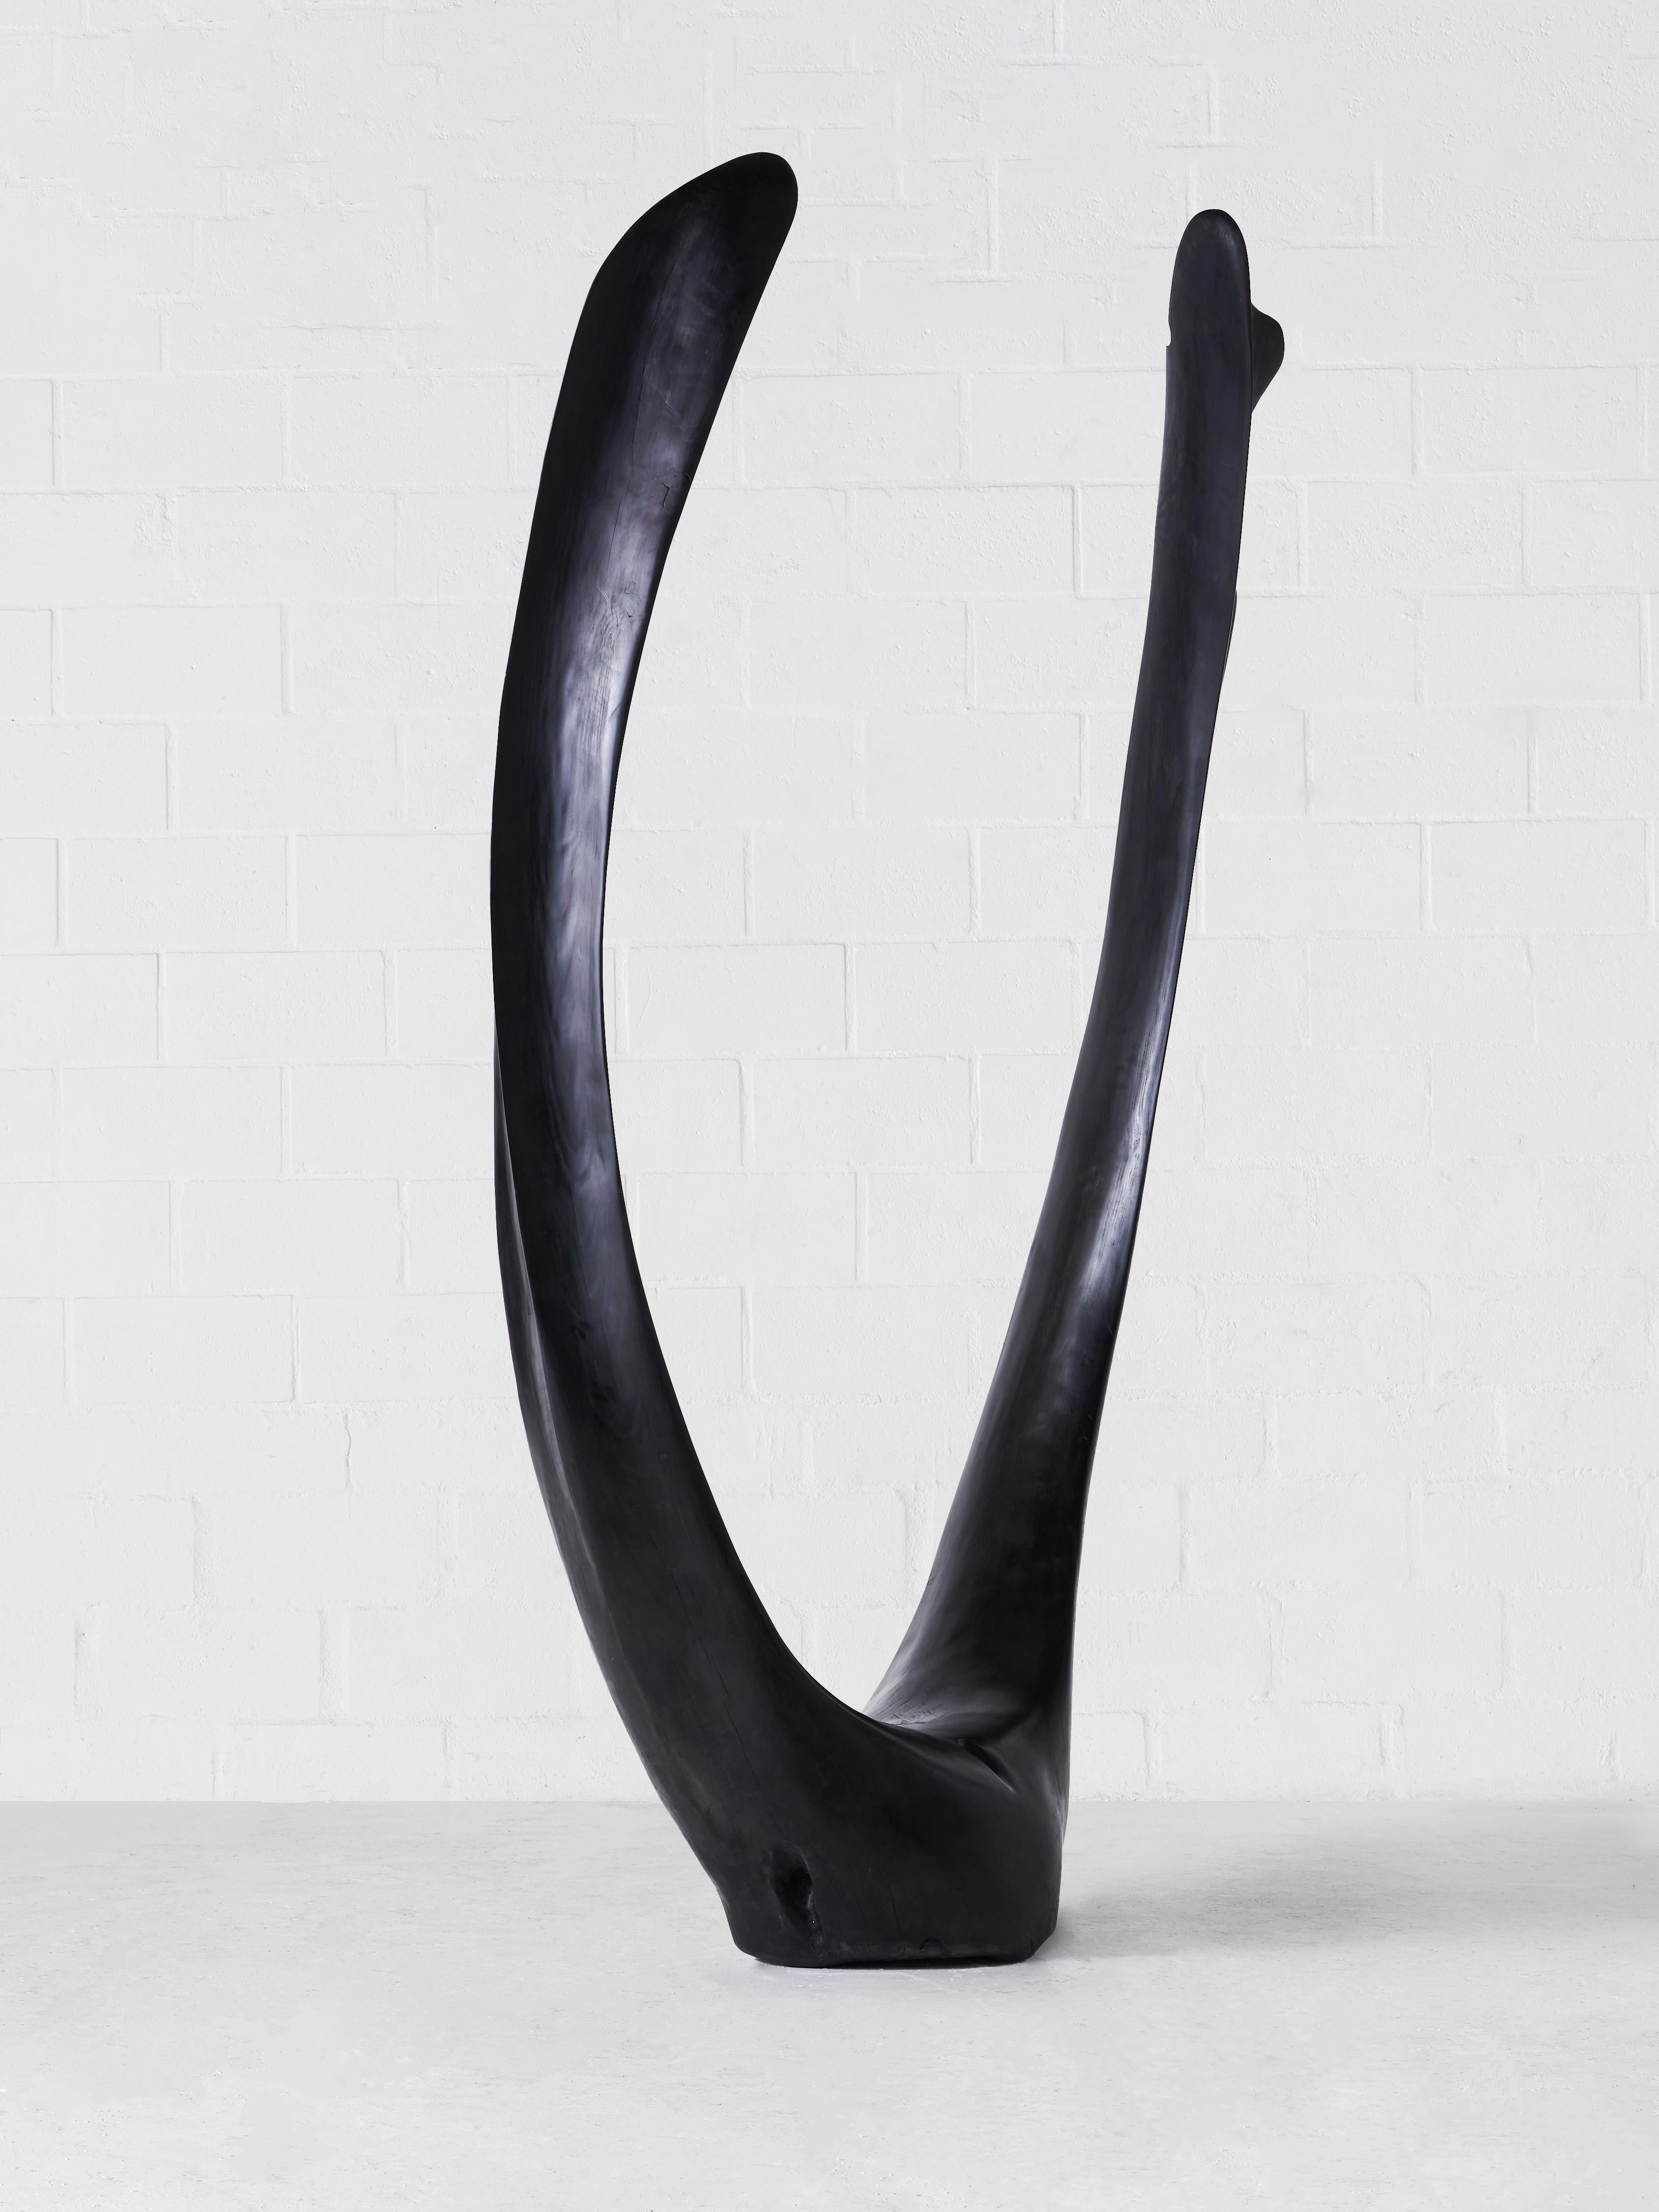 Adam Birch’s practice is driven by a deep understanding and respect for South Africa’s unique ecology. Each of his sculptural works has been intuitively crafted with a dual understanding of the tree’s innate form and how its organic structure can